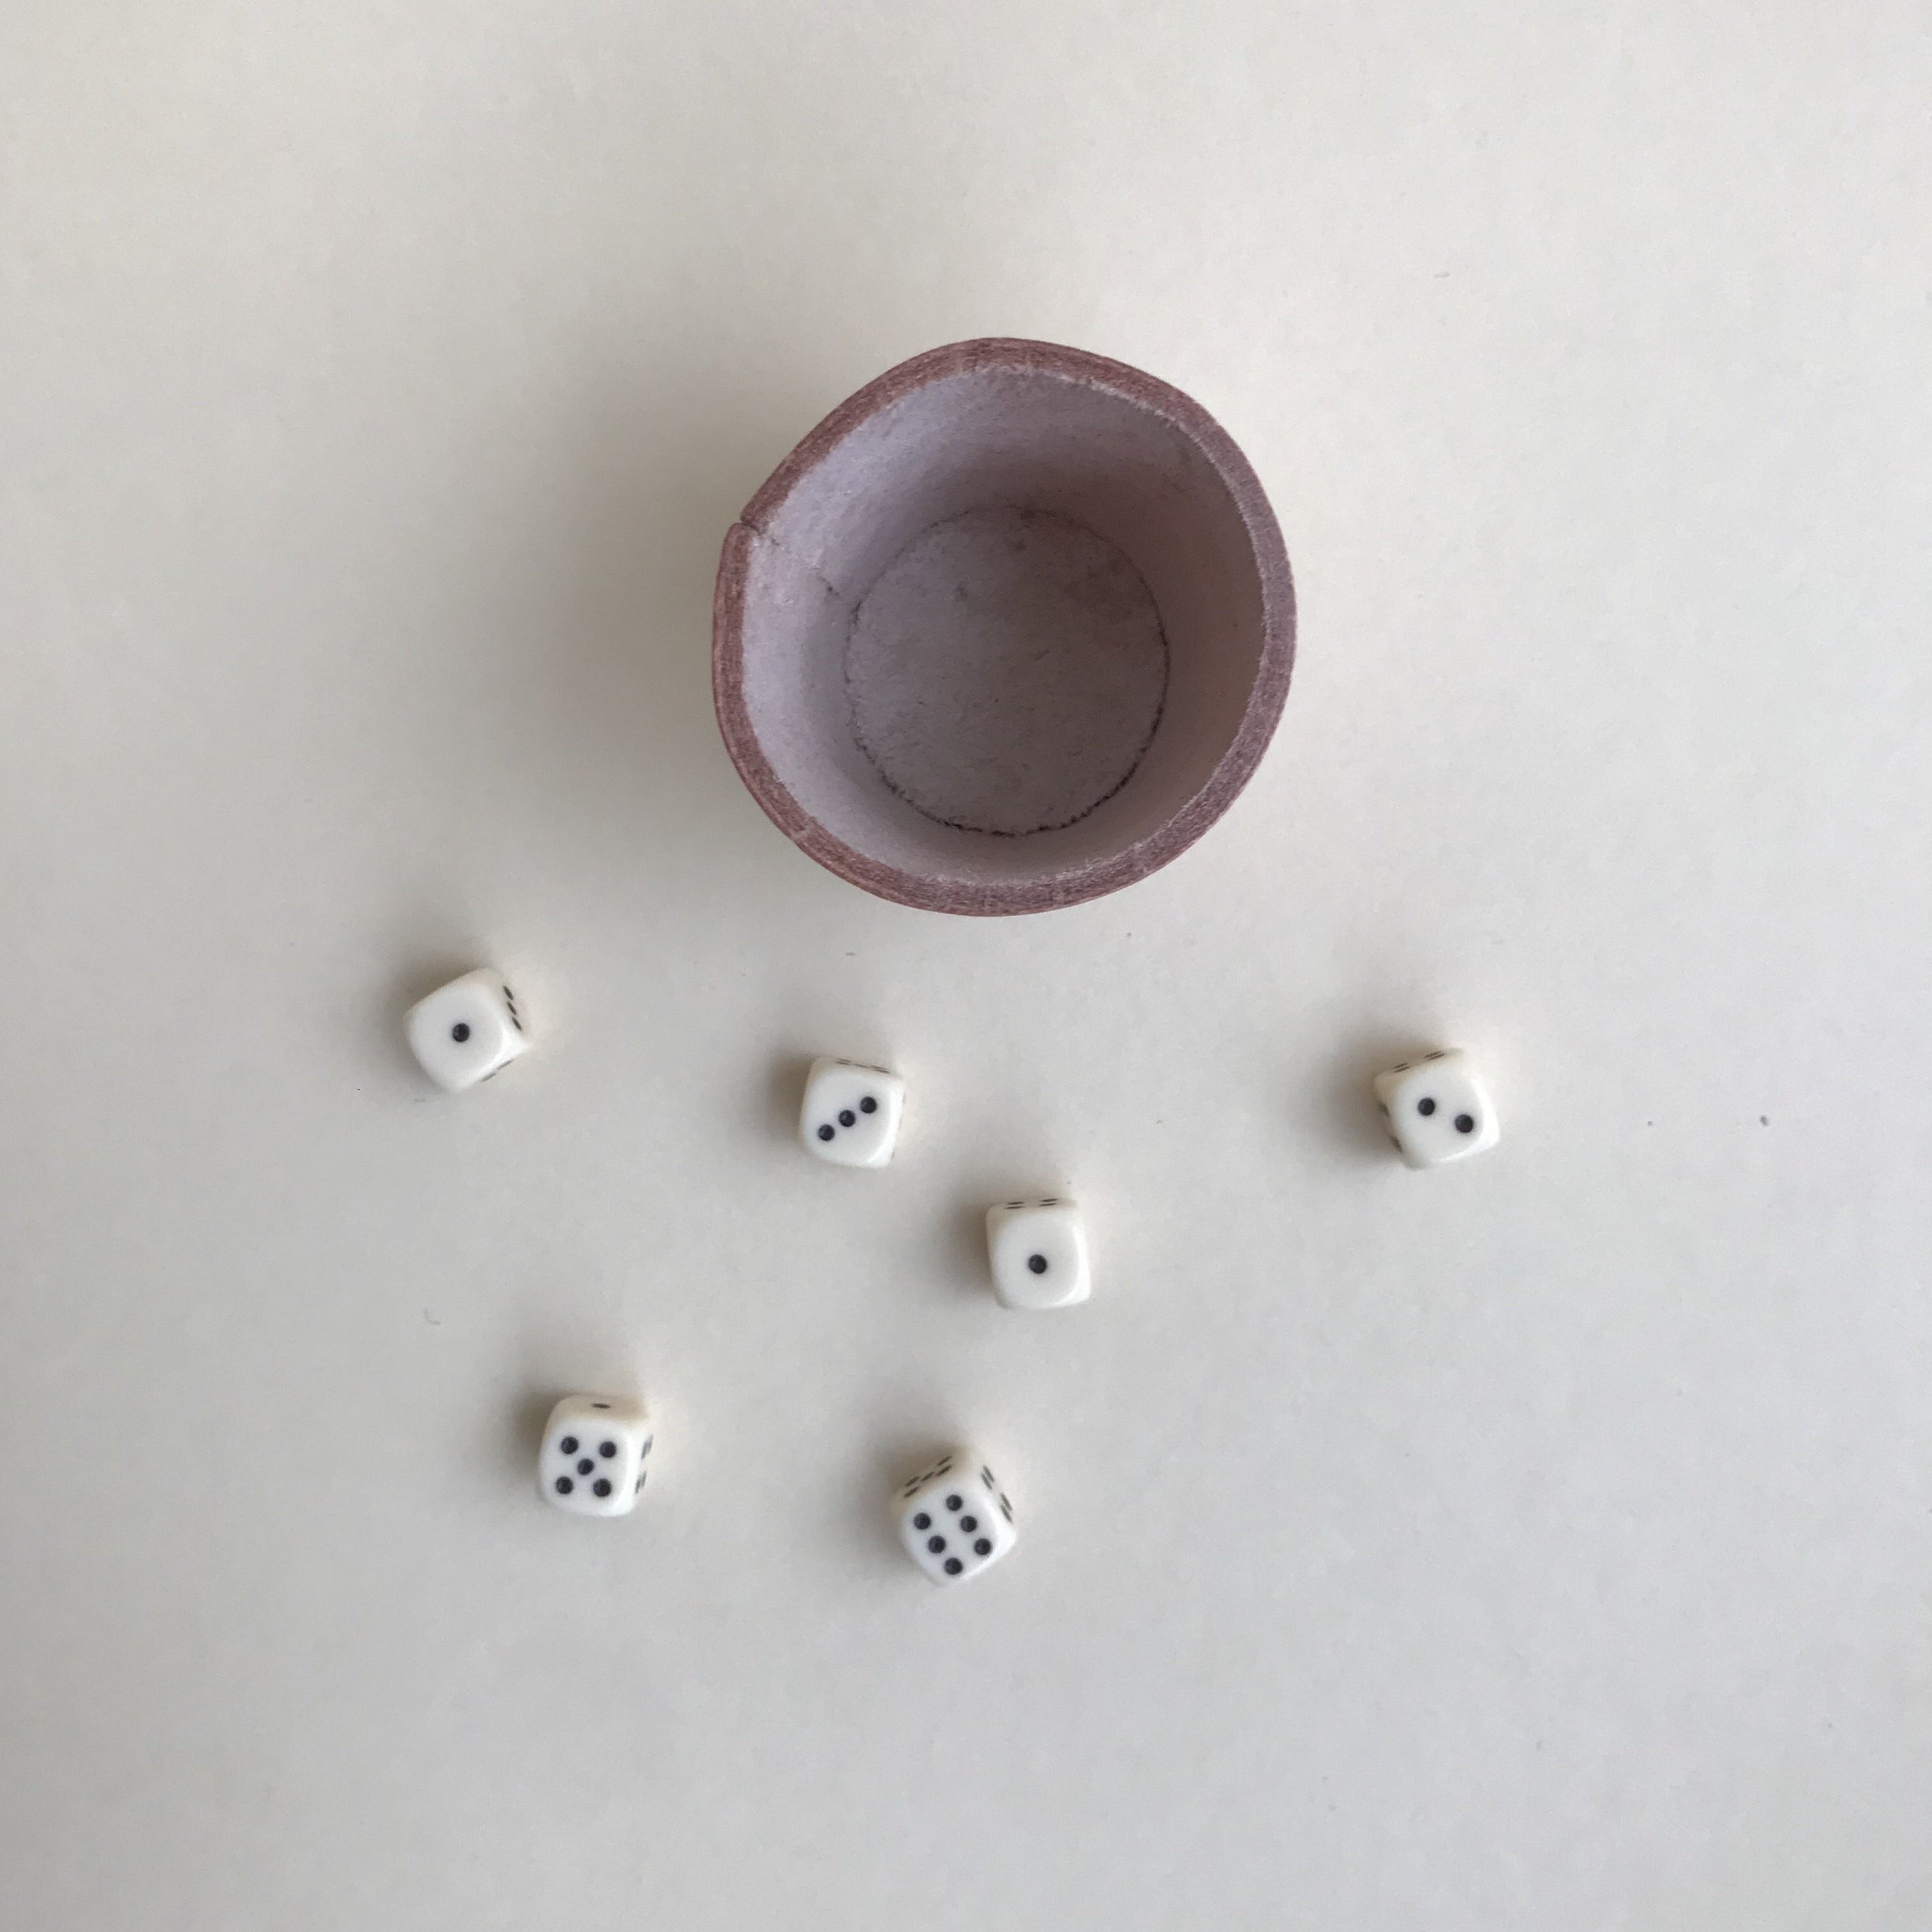 Small leather cup with 6 dices